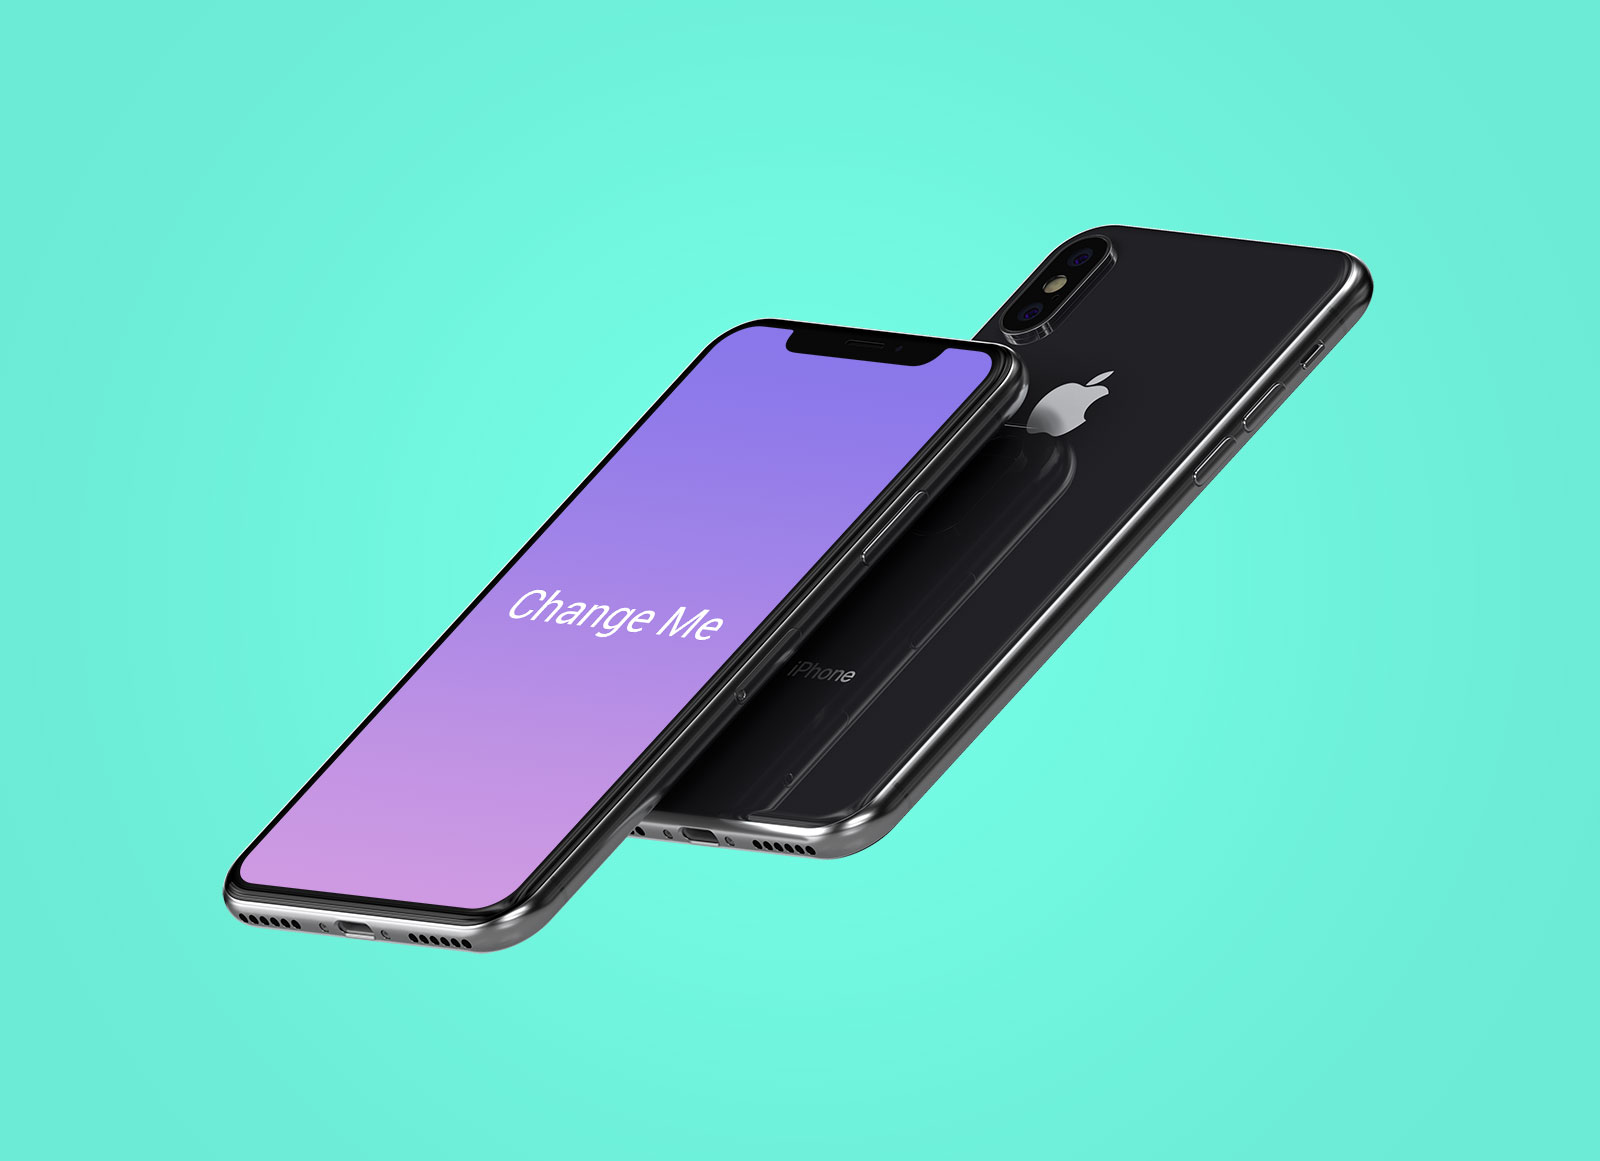 Free-Front-&-Back-Floating-iPhone-X-Mockup-PSD-File (2)